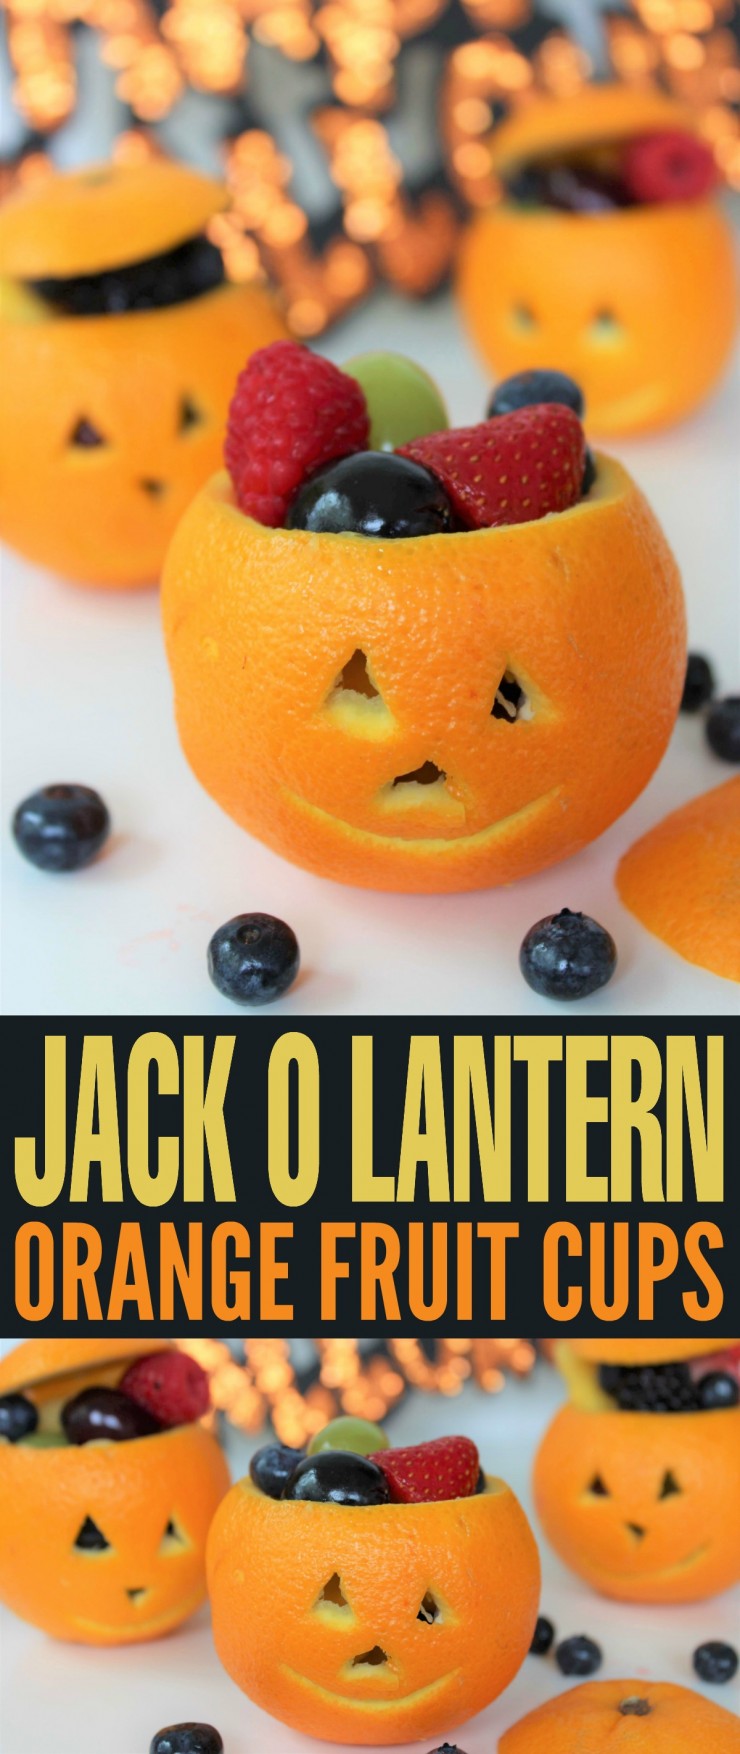 These Jack O Lantern Orange Fruit Cups make for a a healthy but festive Halloween treat, perfect for spooky class parties!